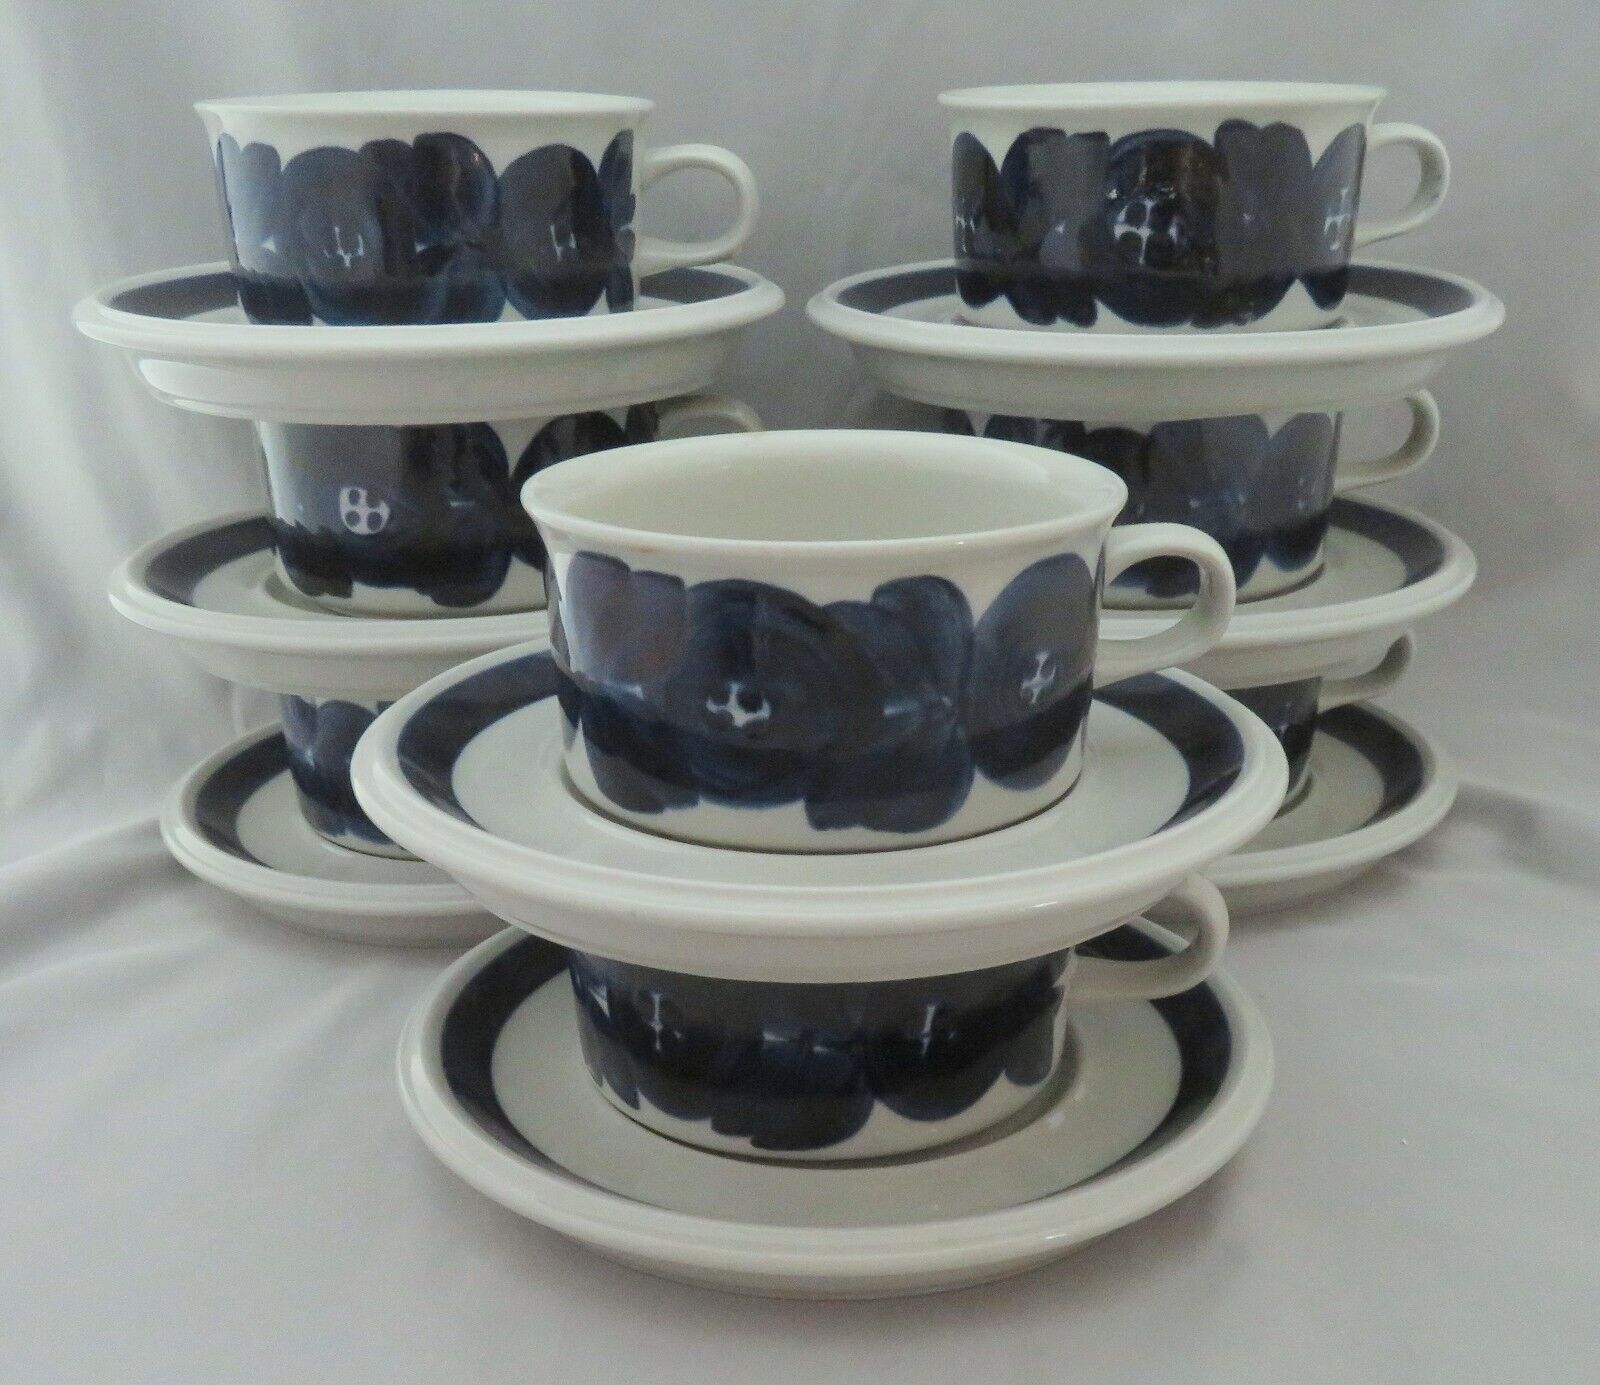 Read more about the article (8) ARABIA Finland Blue ANEMONE Flat Coffee Tea Mug Cup and Saucer Sets + BONUS NR